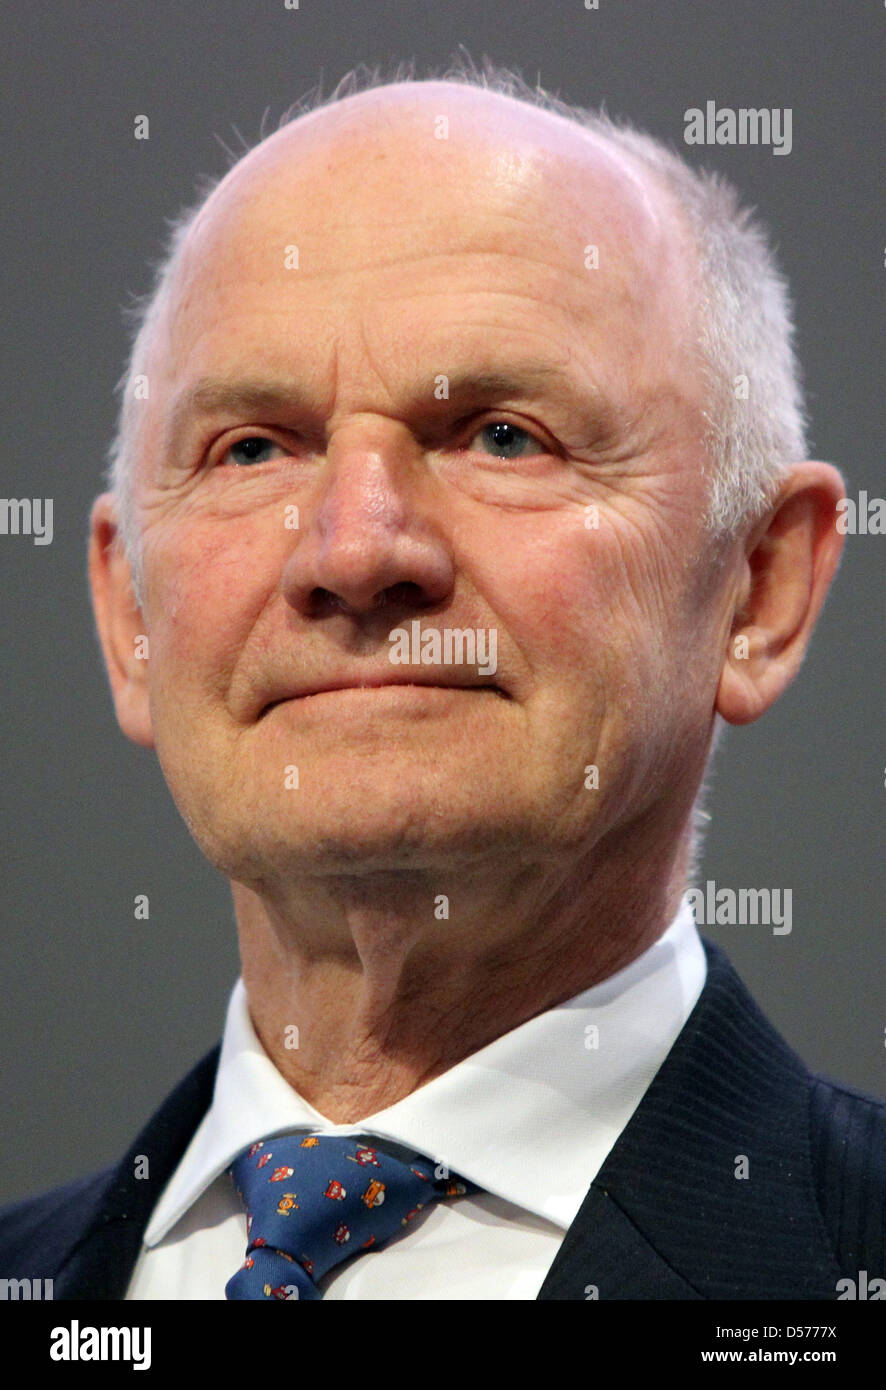 Ferdinand Piech, chairman of the supervisory board of Volkswagen AG, pictured at the company's general meeting in Hamburg, Germany, 22 April 2010. Europe's largest automaker Volkswagen increased its profits in the first quarter of 2010. The earnings after taxes increased by nearly 95 per cent to 473 million euros, the turnover increased by 19 per cent to 28.6 billion euros in compa Stock Photo